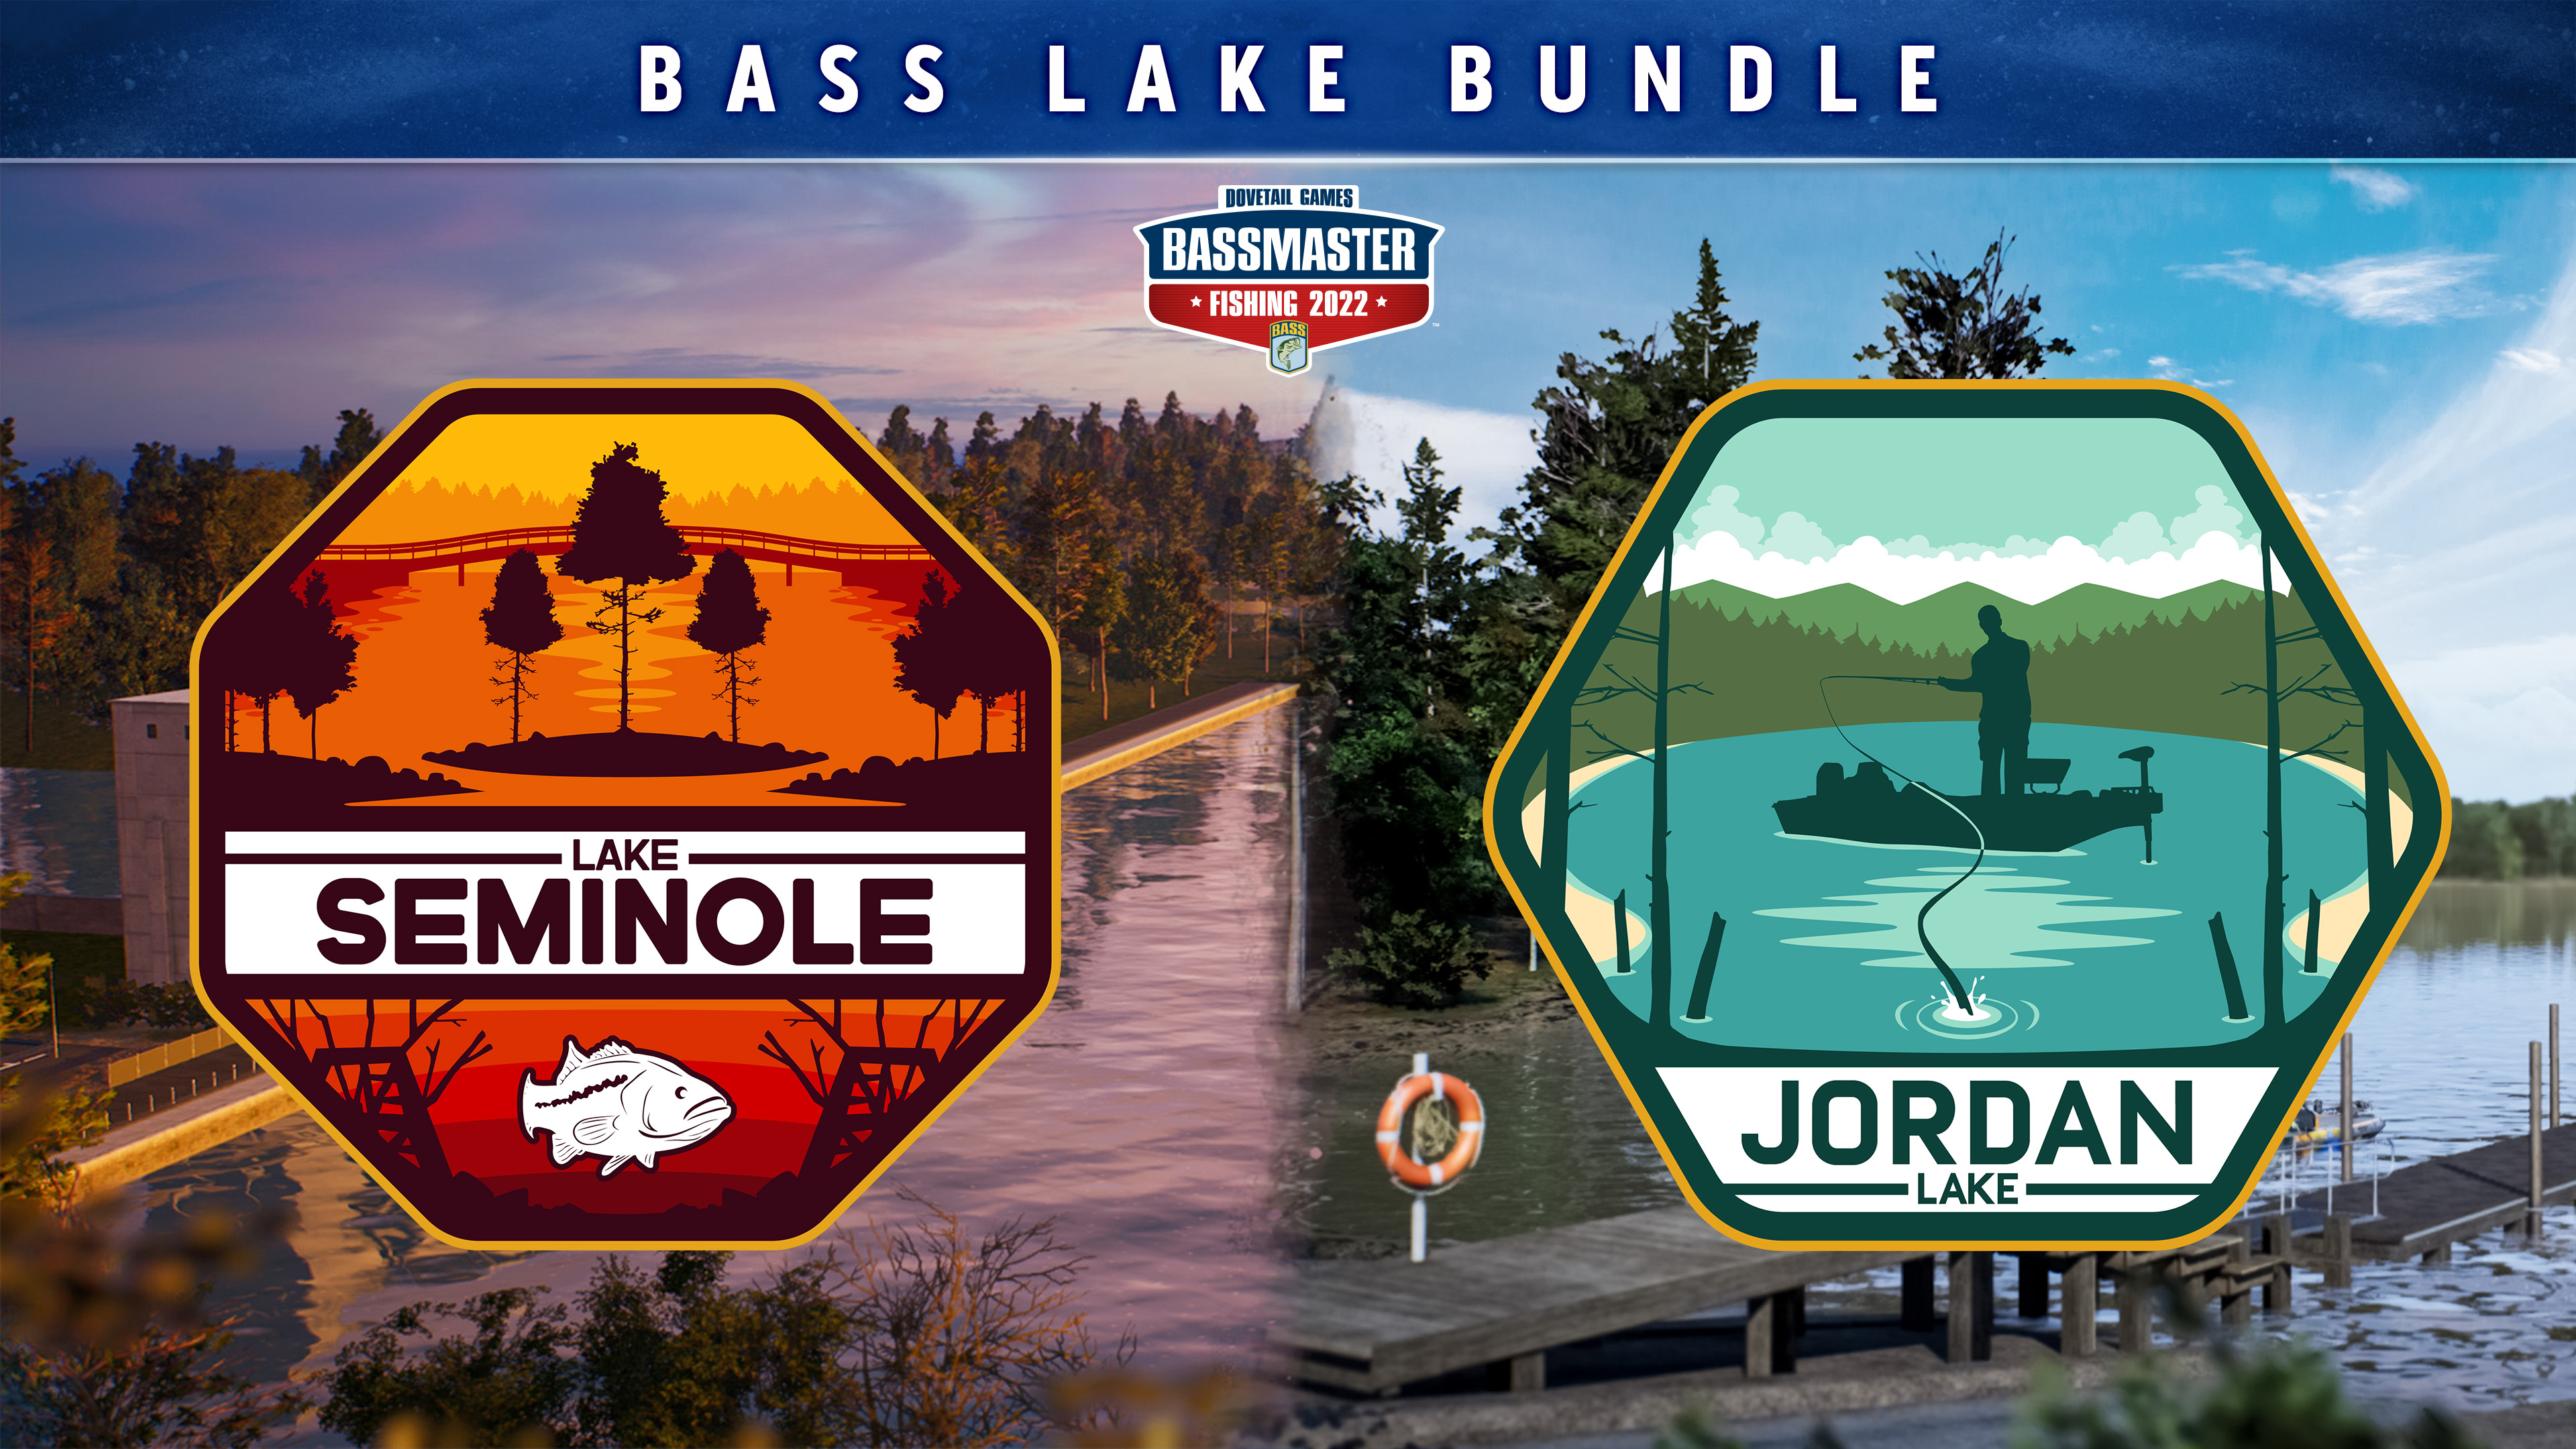 Land a Big Basin Bass in the Bassmaster® Fishing 2022 'Bass Lake Bundle'  DLC, Now Available - ONE PR Studio